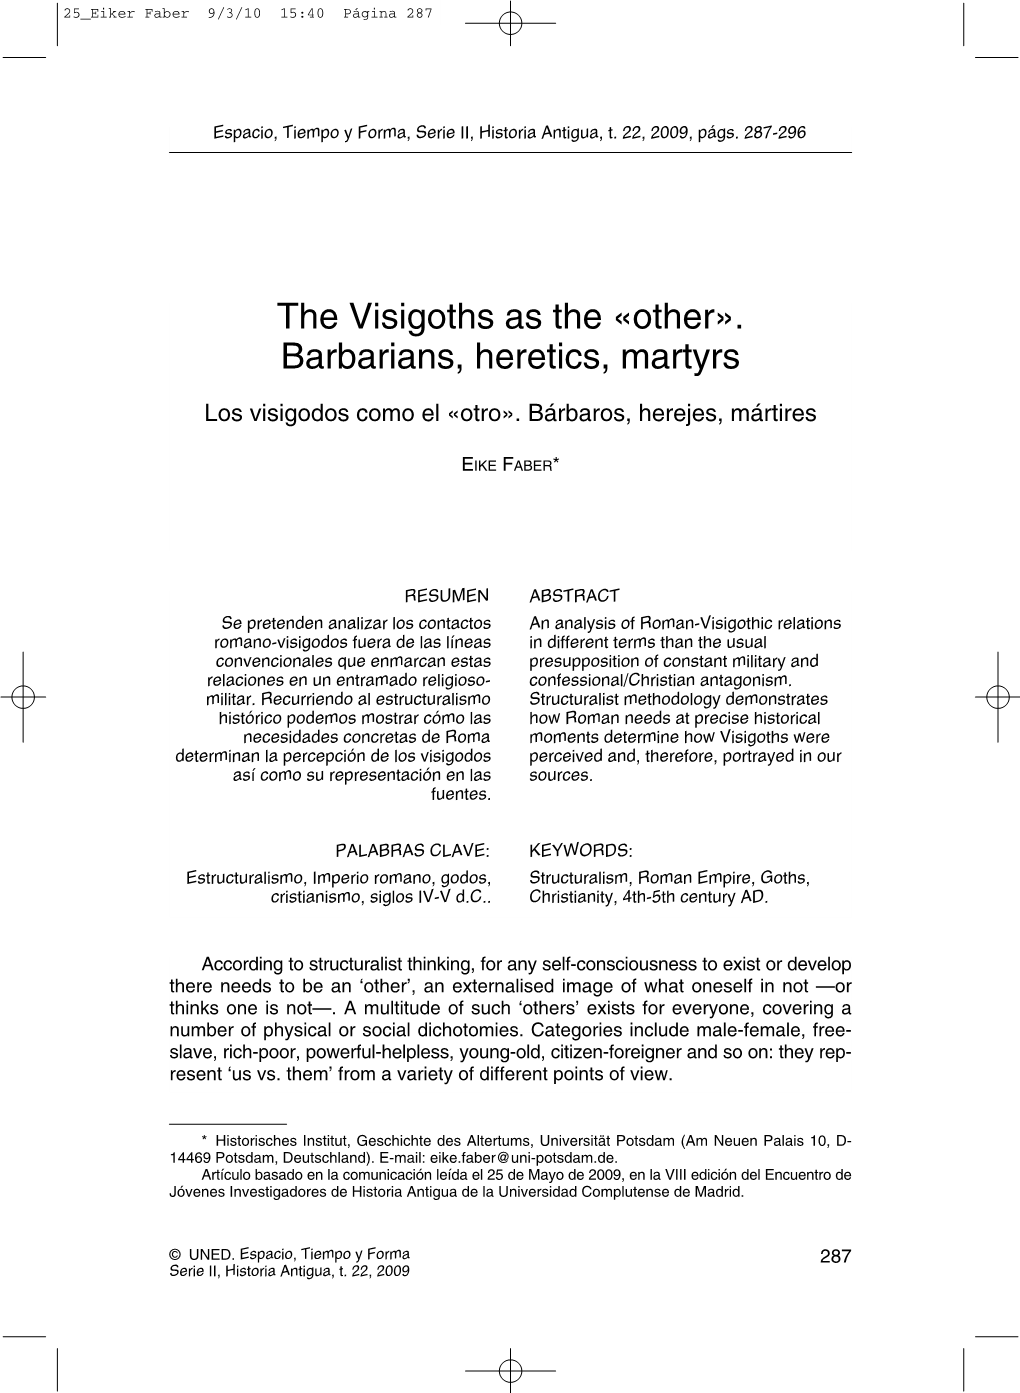 The Visigoths As the «Other». Barbarians, Heretics, Martyrs